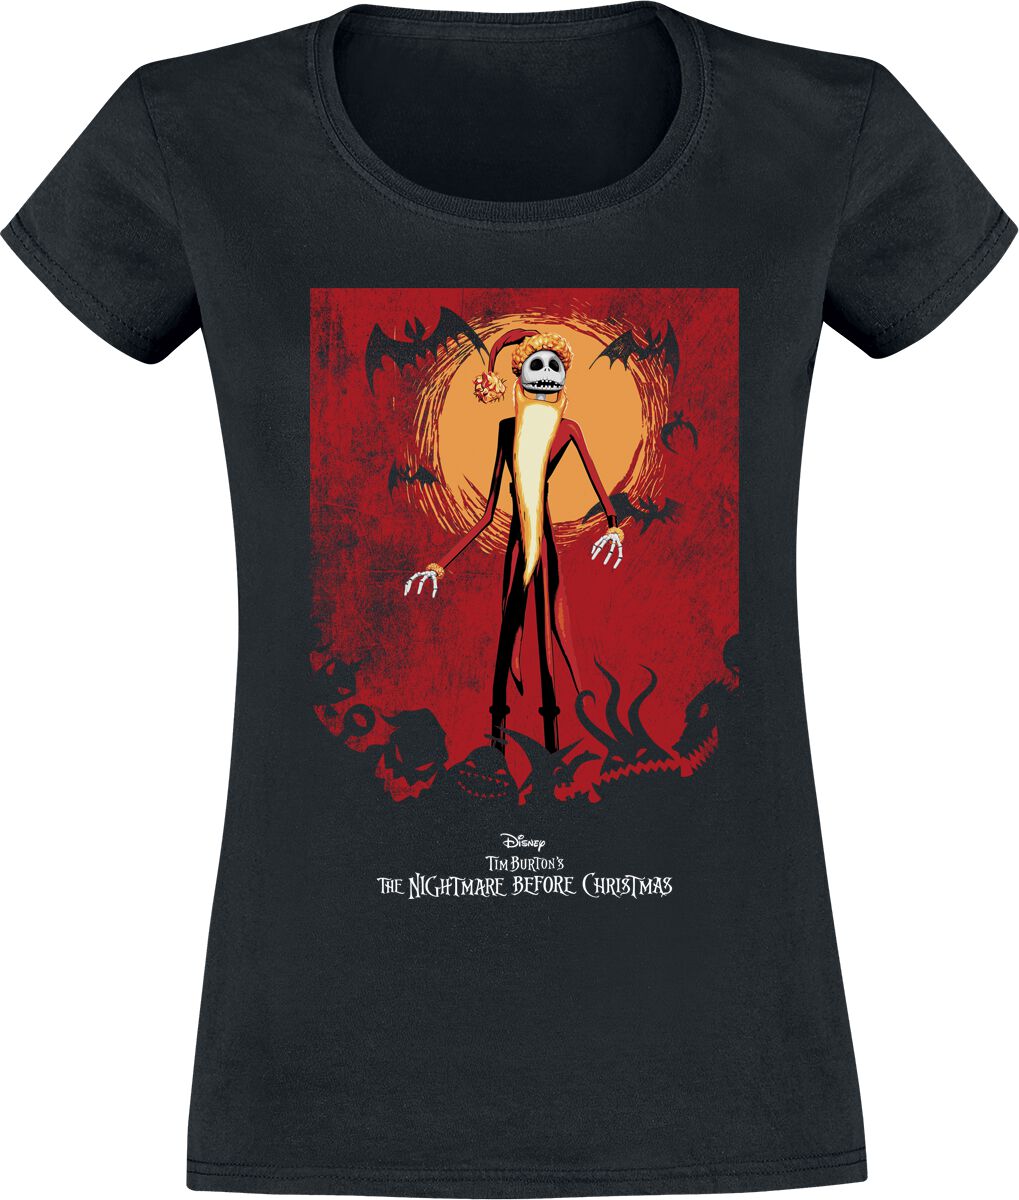 Image of T-Shirt Disney di Nightmare Before Christmas - Scary Christmas Jack - S a XL - Donna - nero